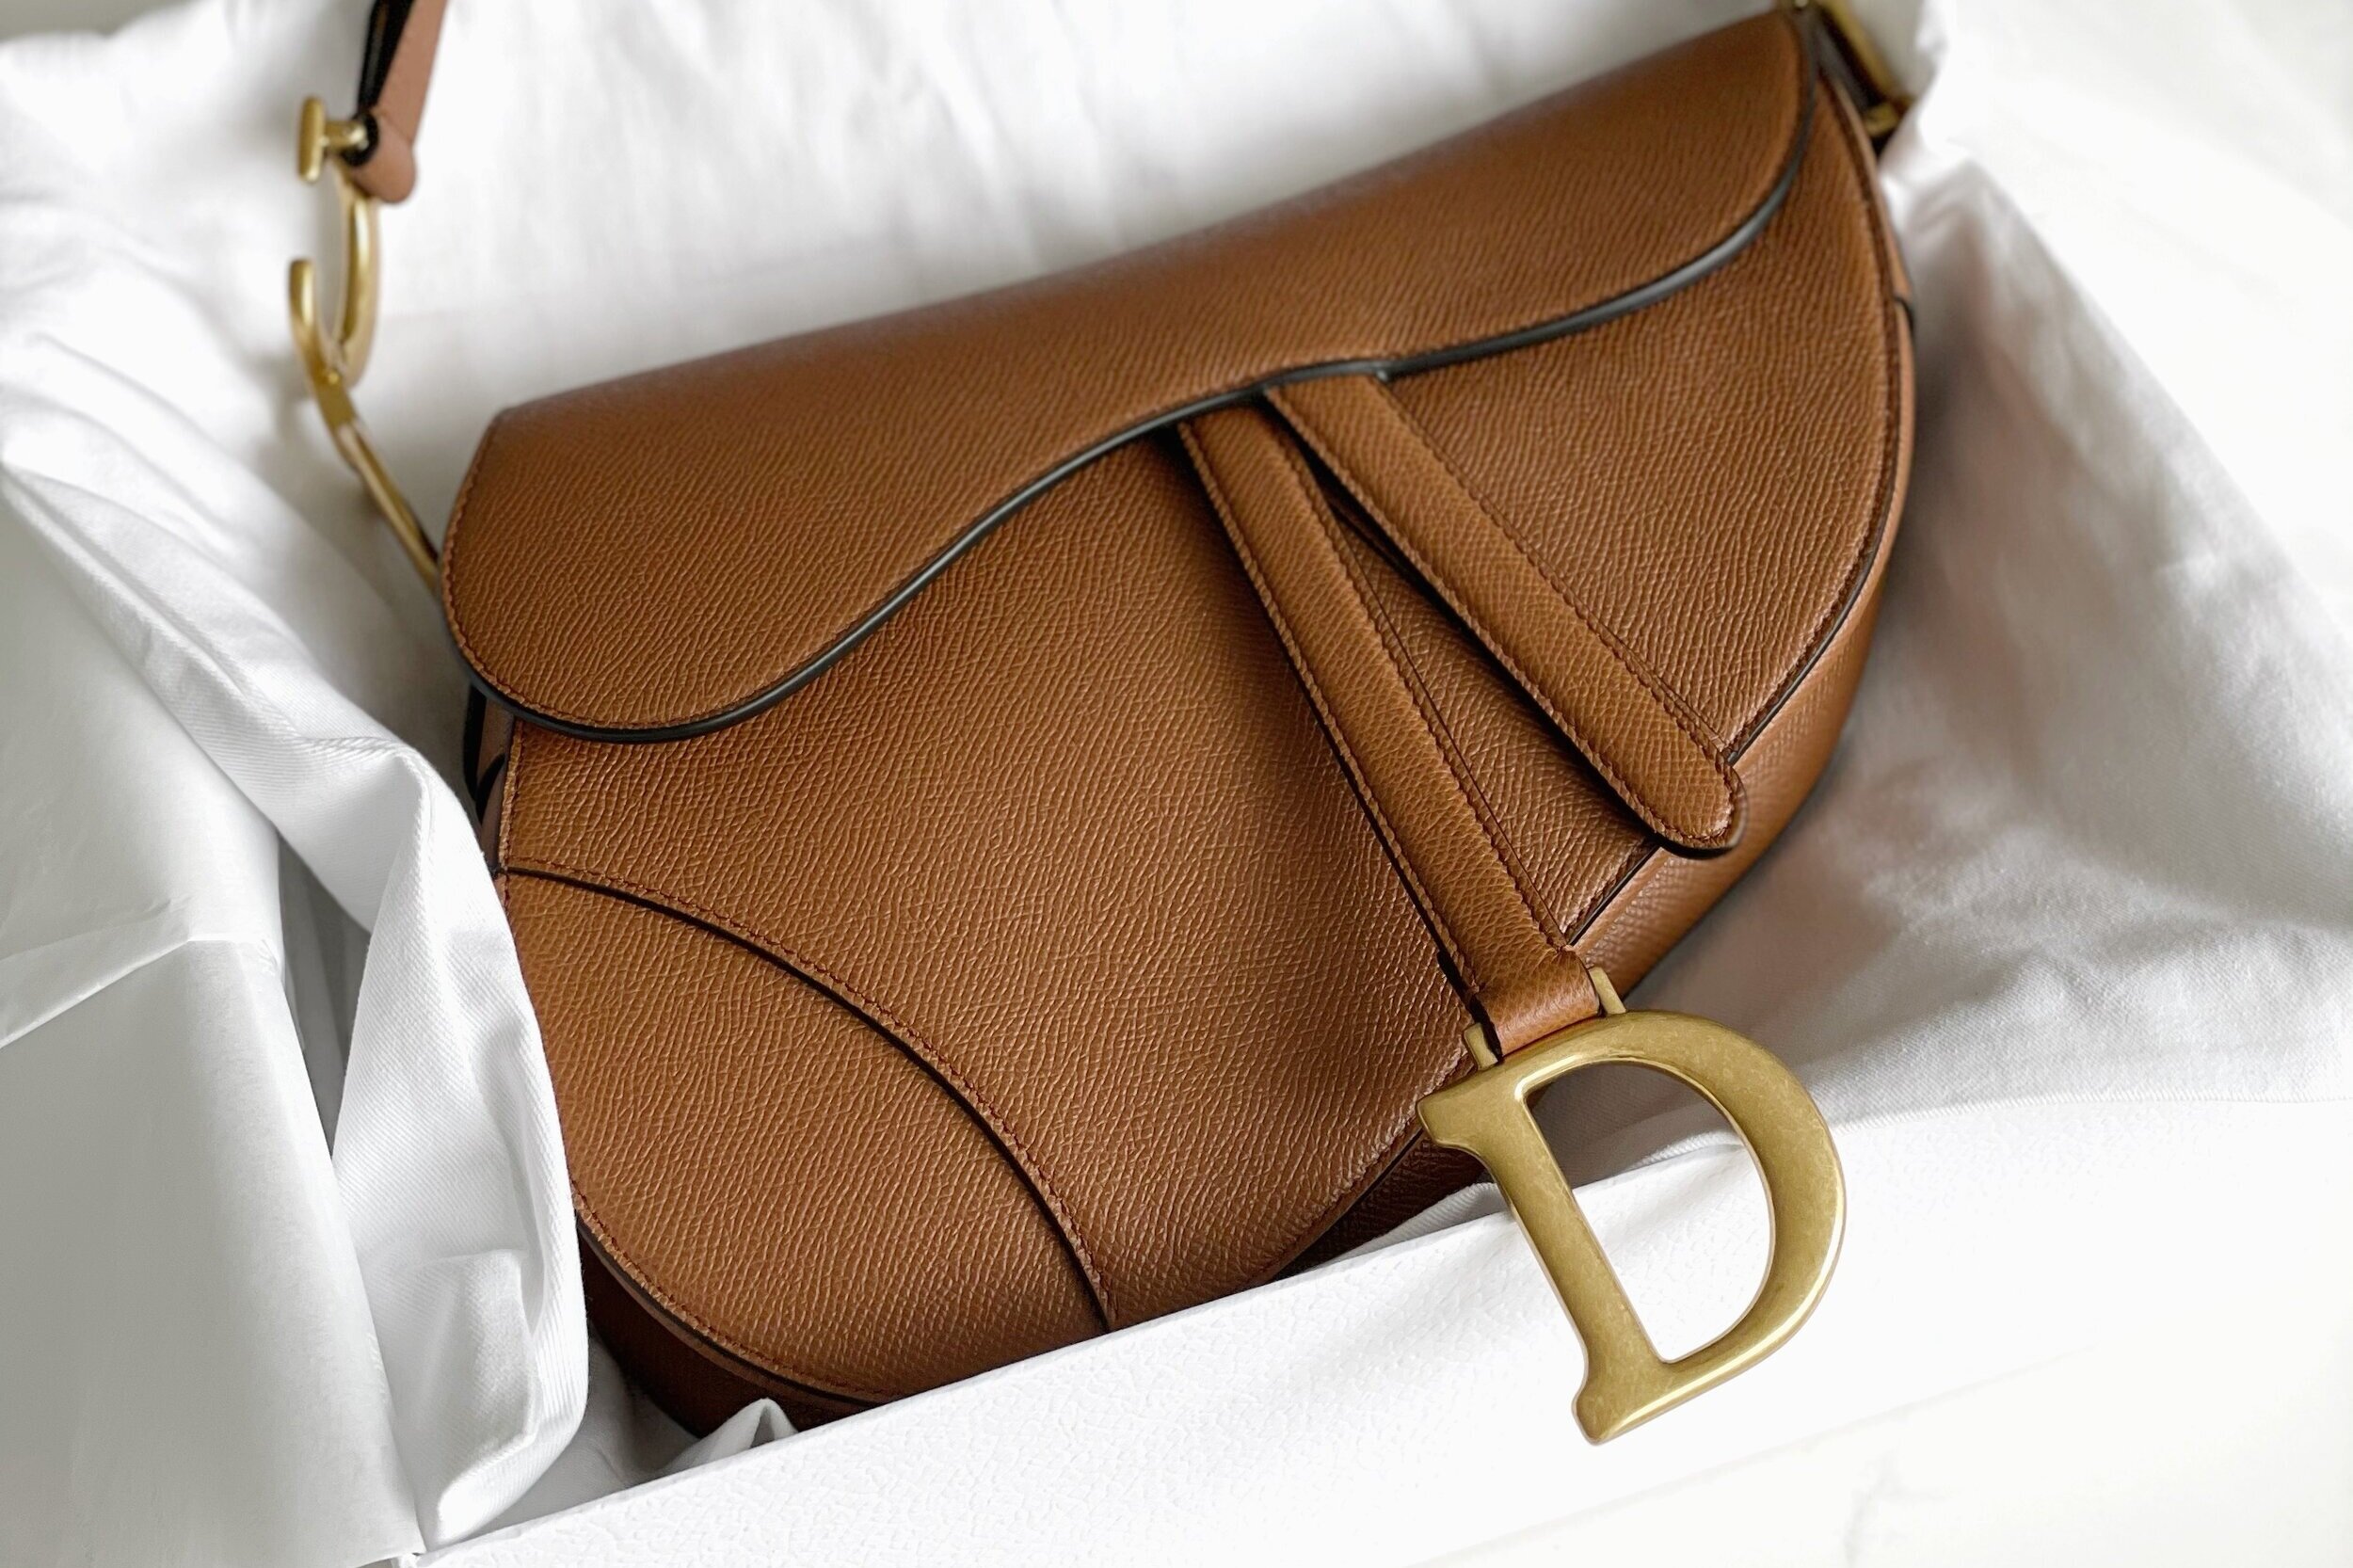 Dior Saddle Bag Unboxing and Review — The Ordinary Wongs